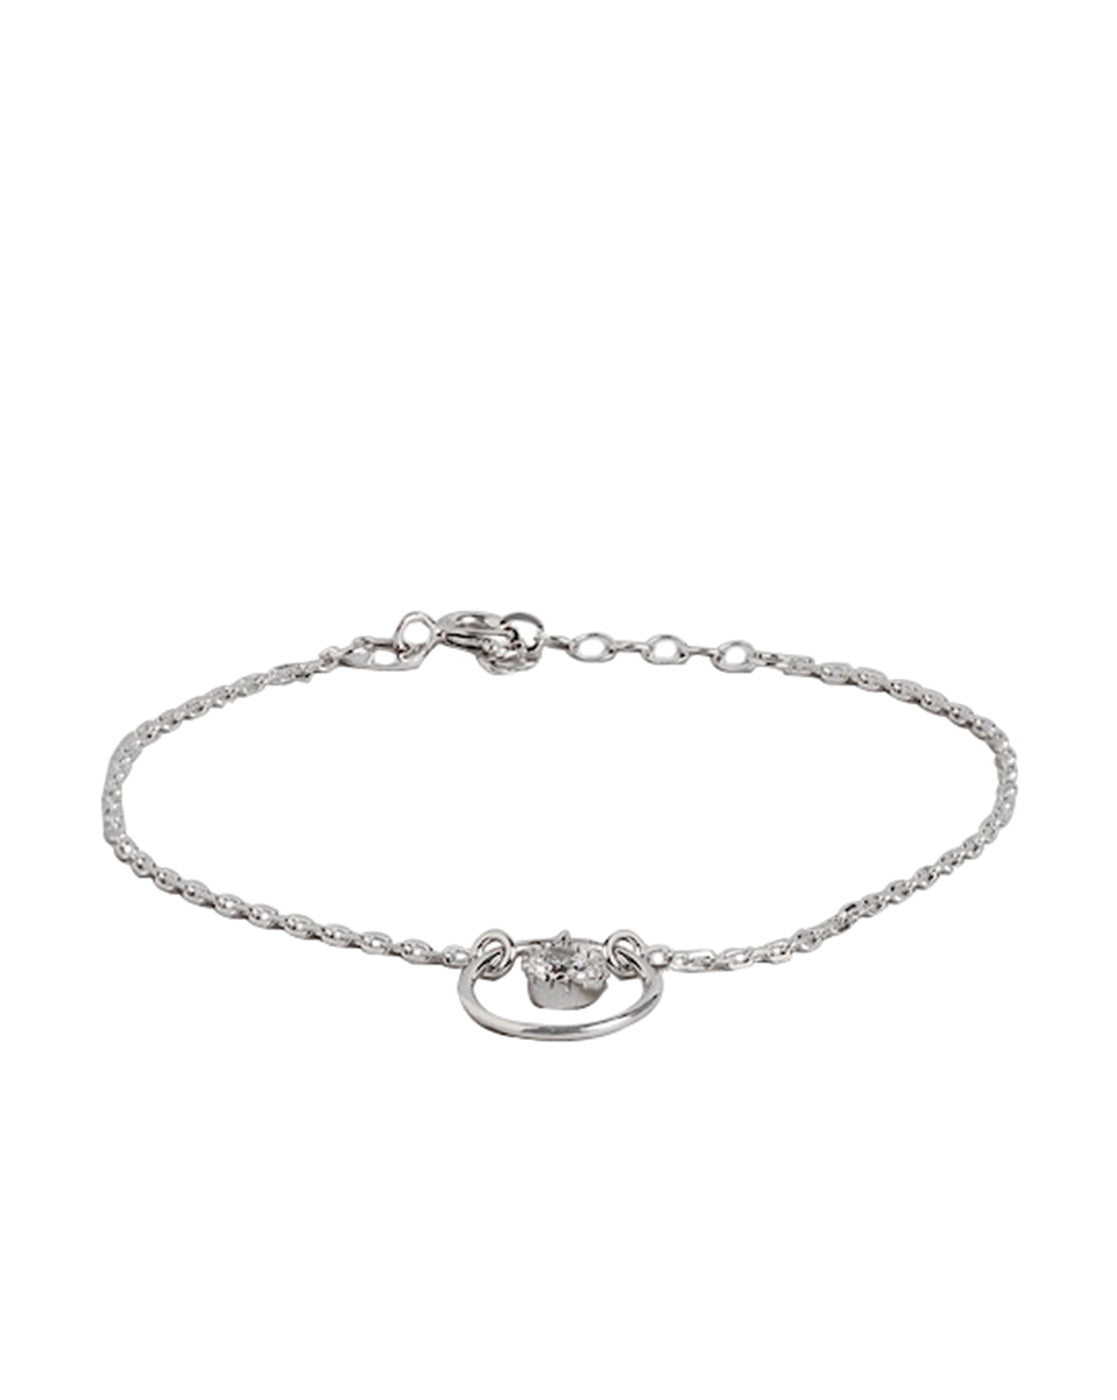 Rhodium Plated With Cz Charm Bracelet For Women